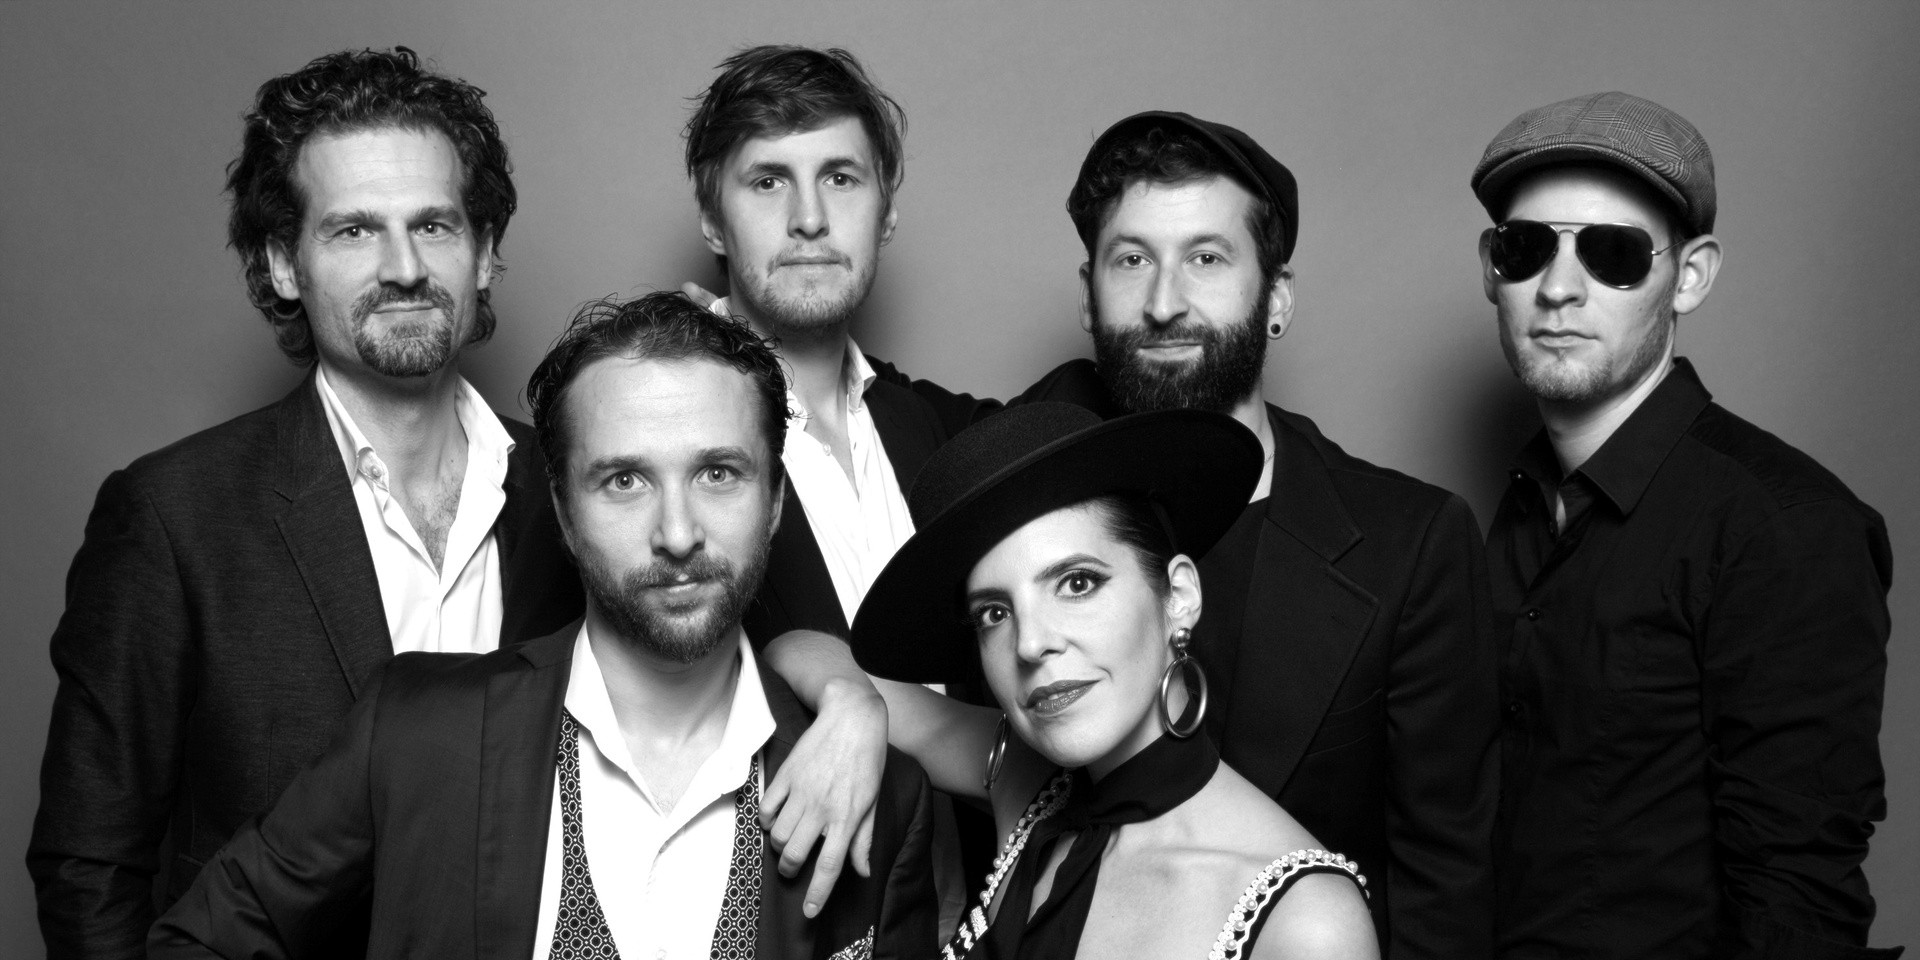 An interview with electro-swing maven Parov Stelar ahead of Sing Jazz 2018